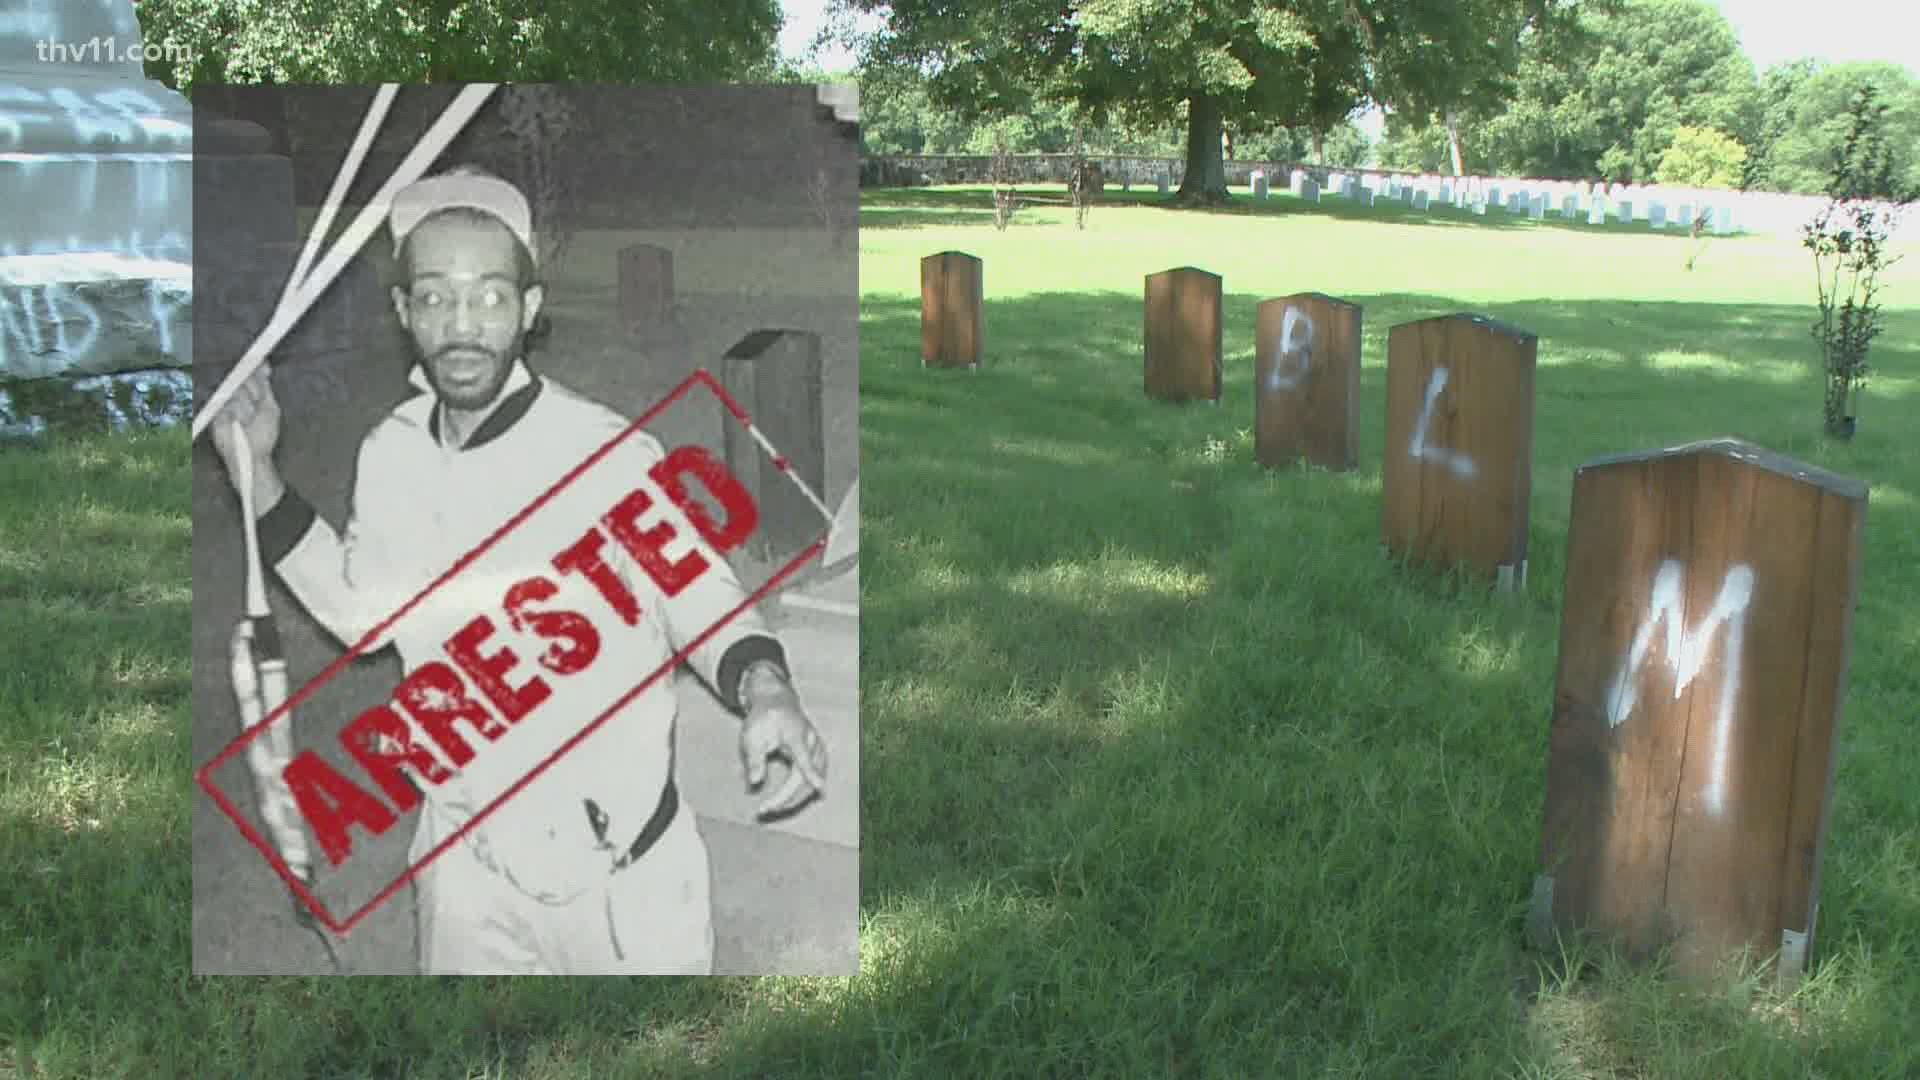 Little Rock police arrest a man they say is responsible for vandalizing a cemetery in July.